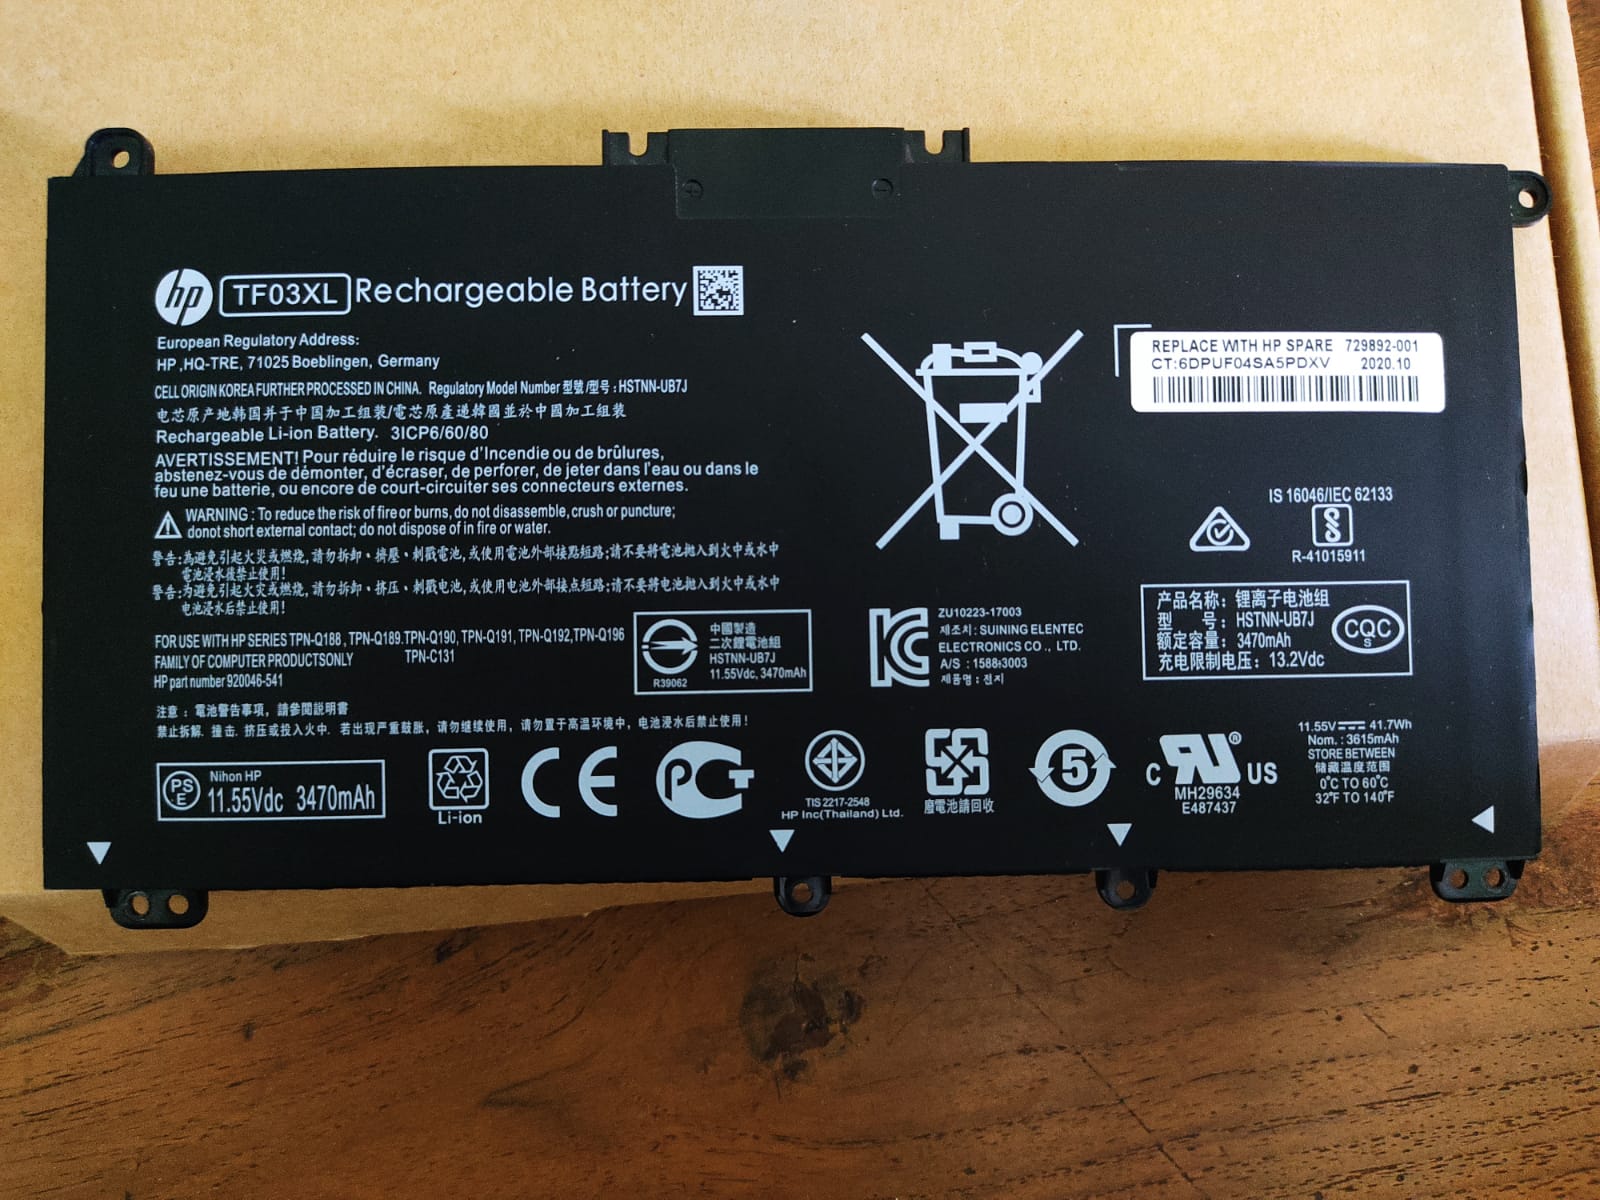 Is this battery original? - HP Support Community - 8347131